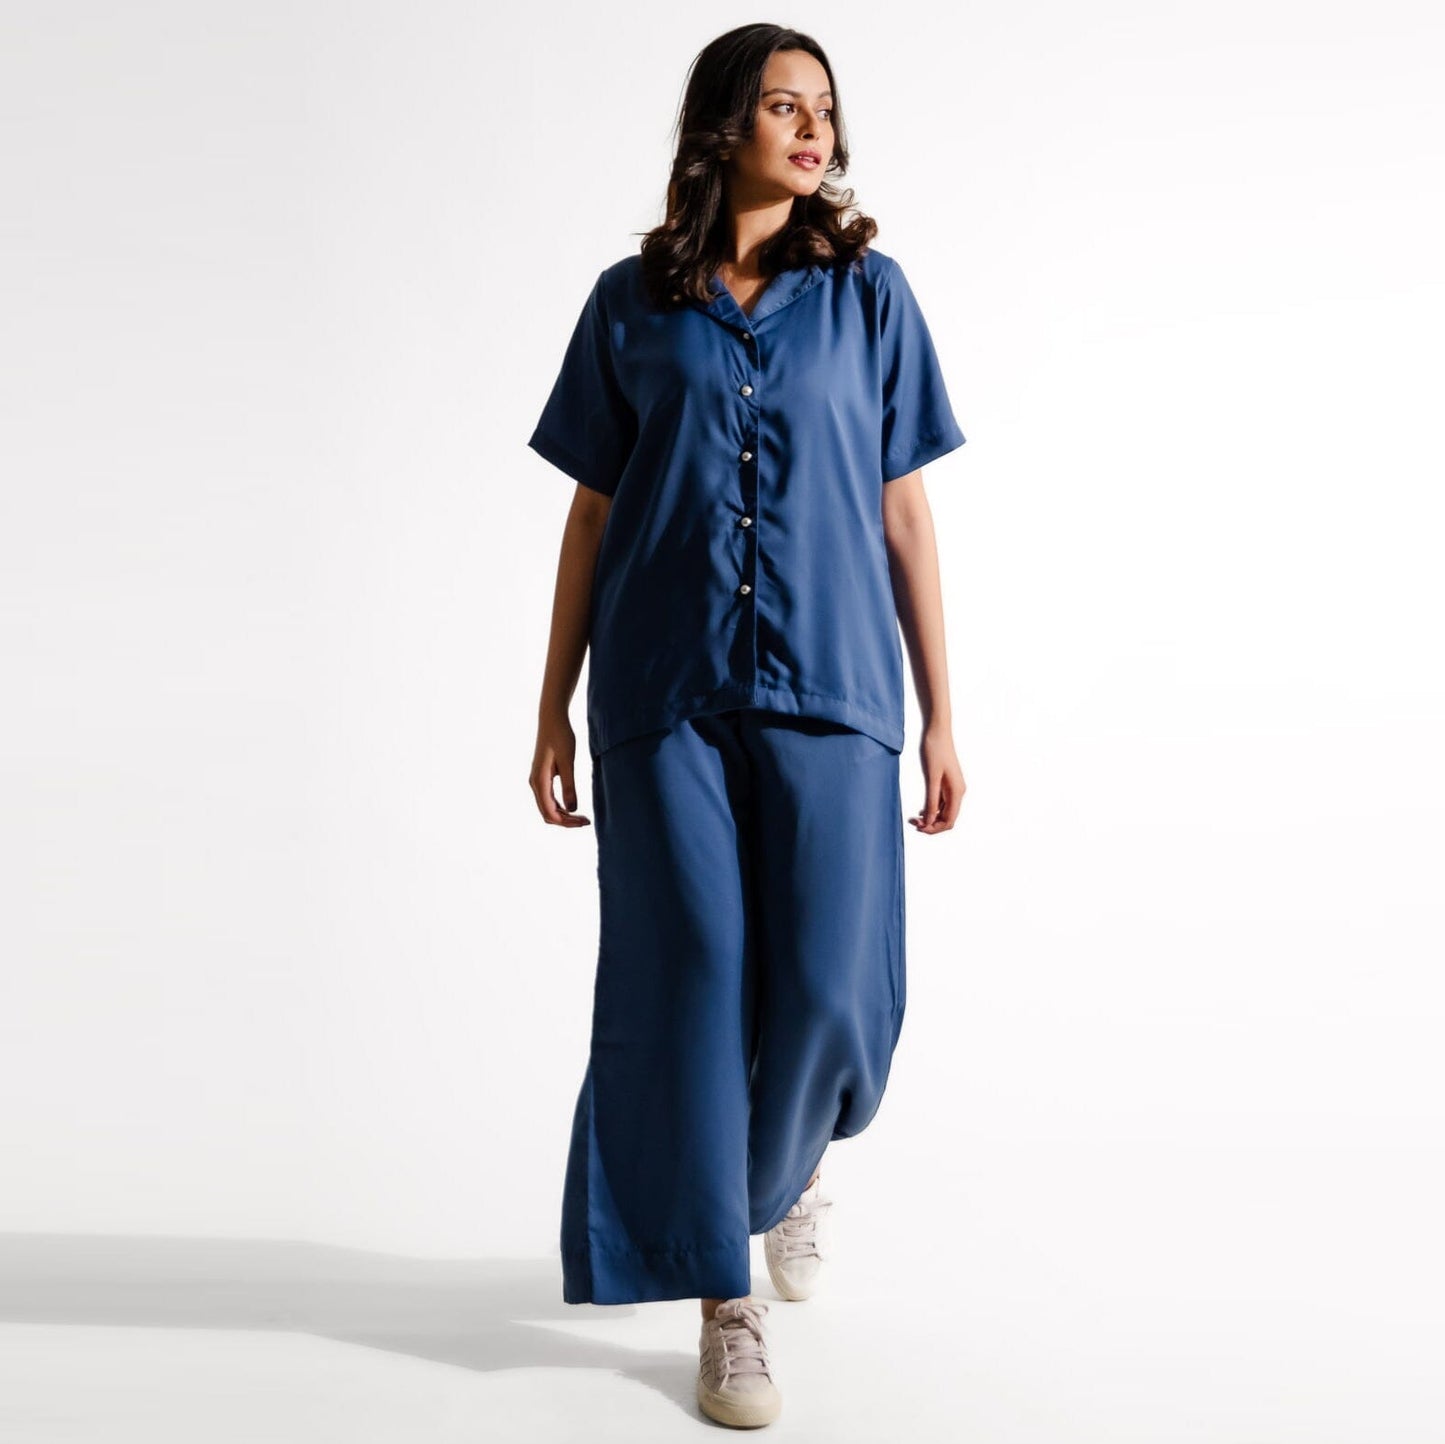 East West By Polo Republica Women's Solid Co-Ord Set Women's Co Ord Set East West Navy Blue XS 